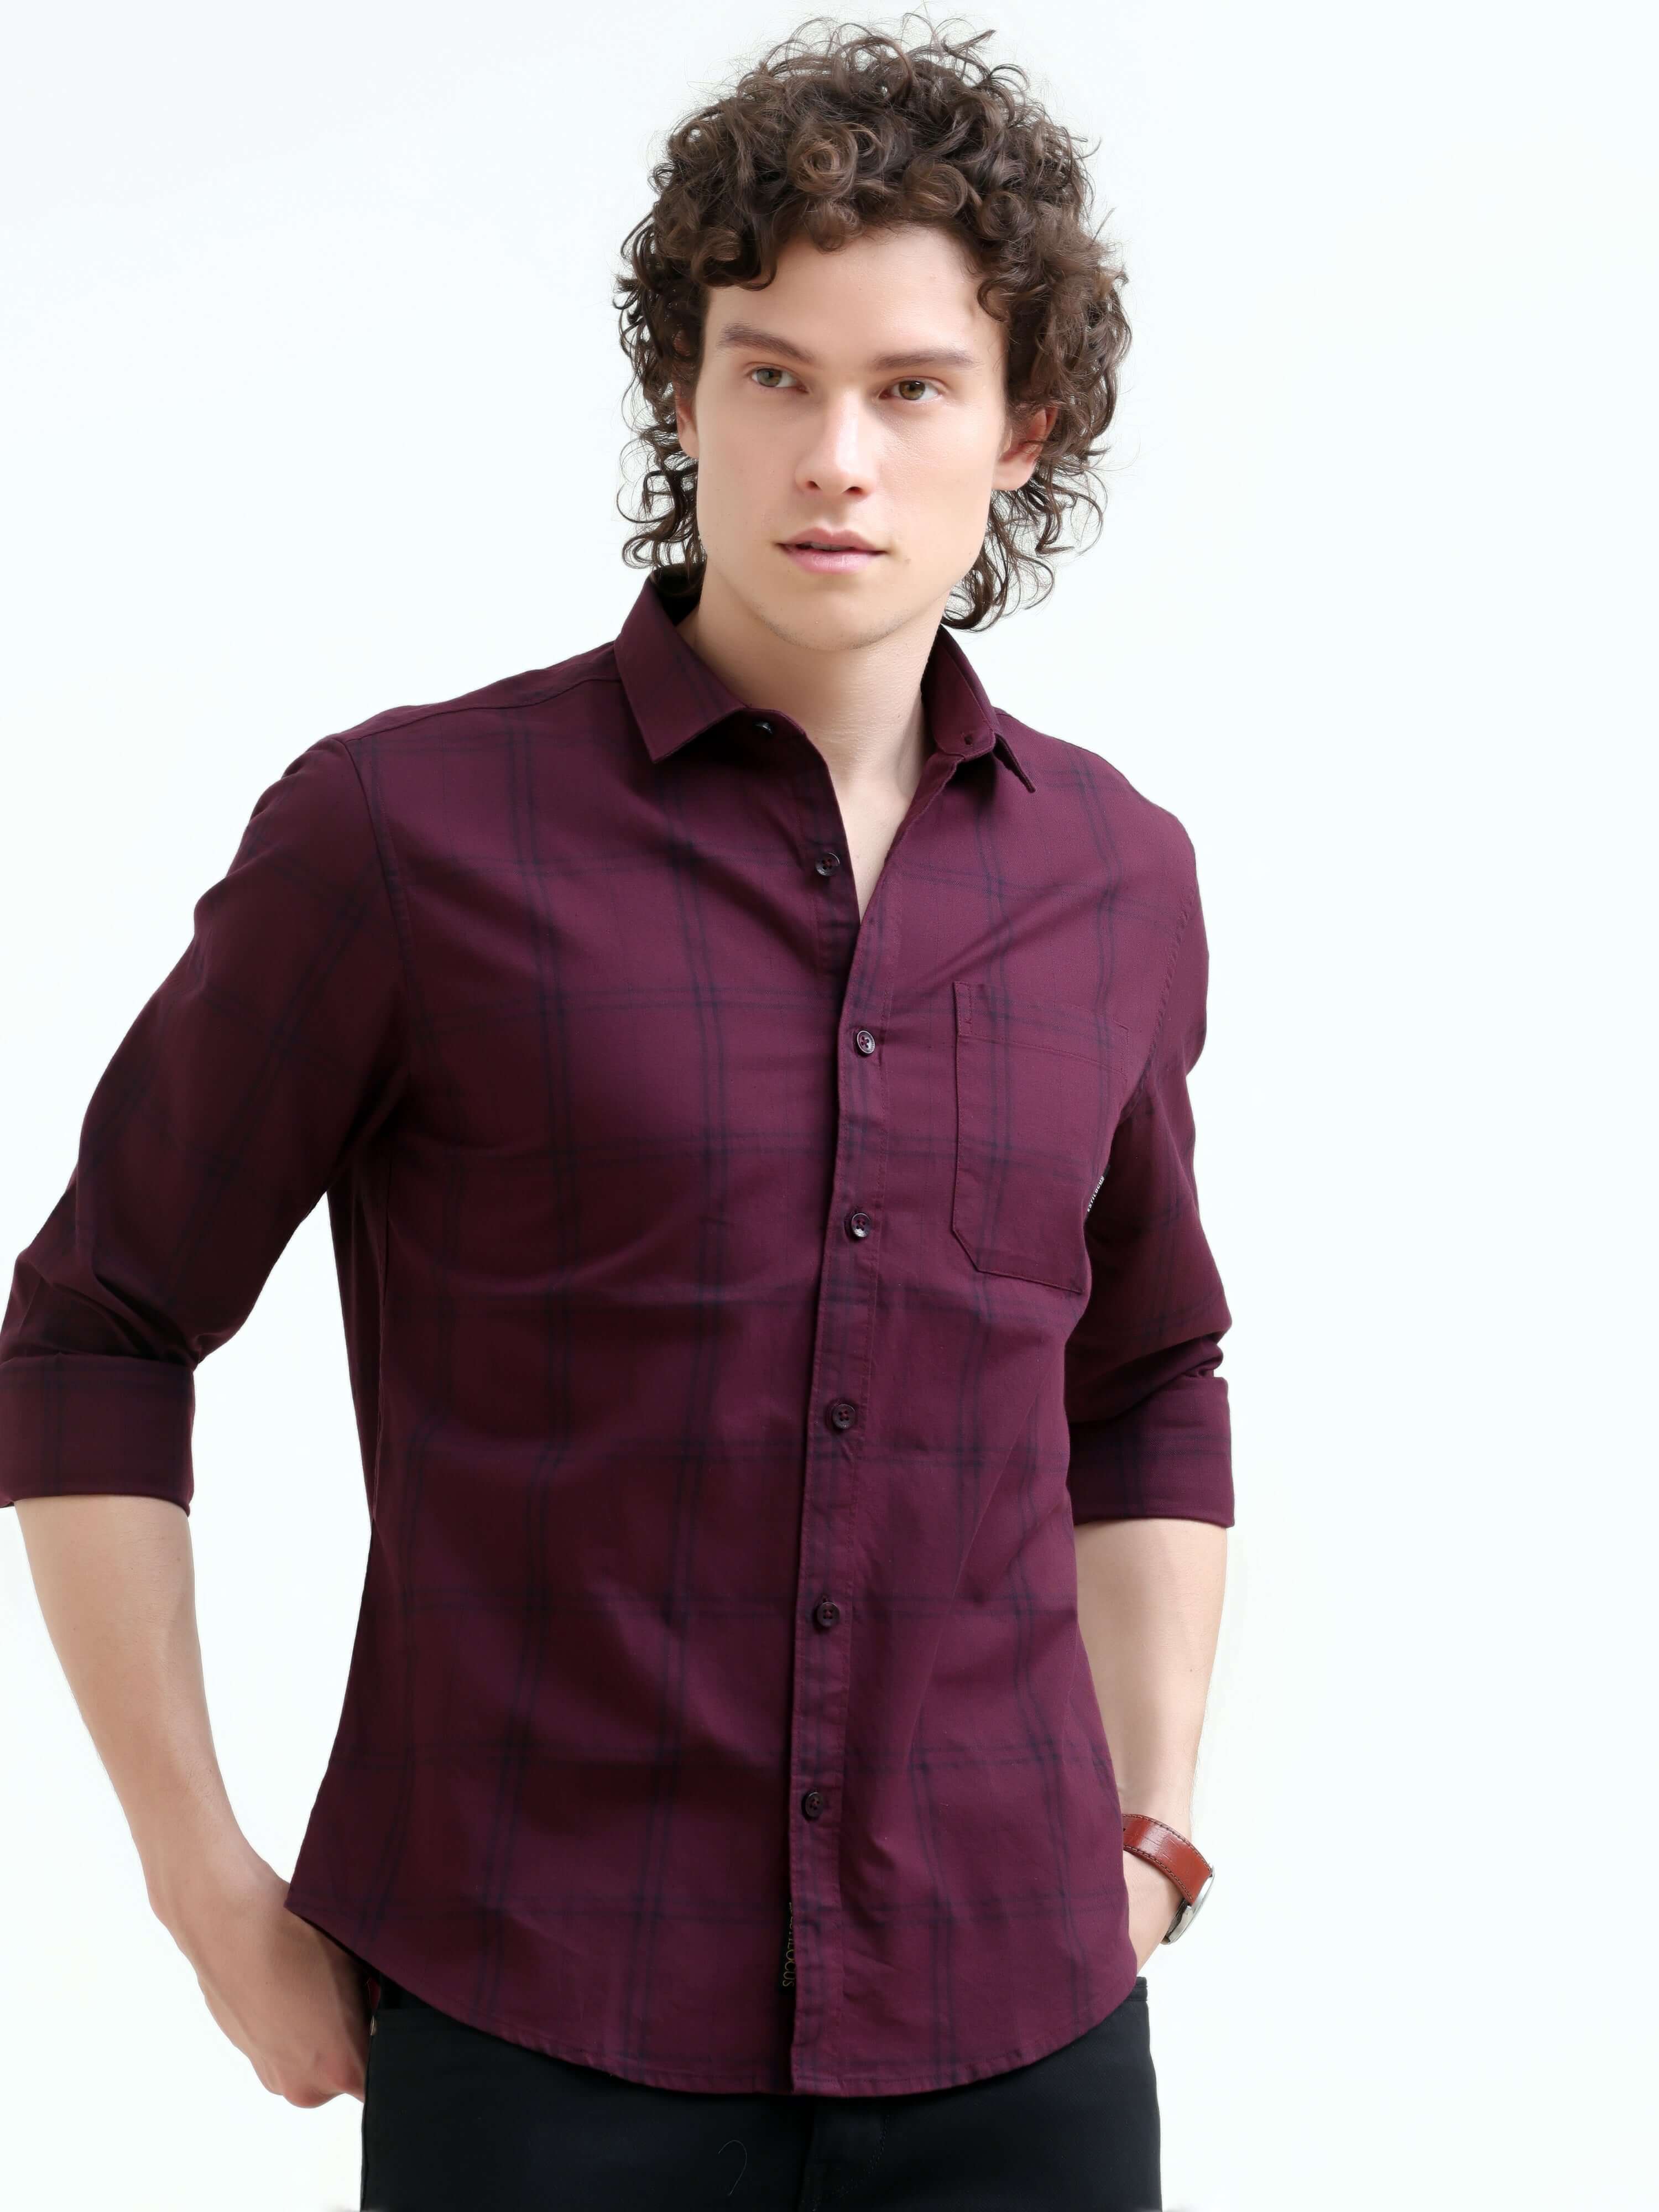 Solan Maroon Check Shirt - New Men’s Summer Casual Wear shop online at Estilocus. Elevate your style with the Solan windowpane check shirt. Perfect for summer and versatile for any setting. Shop the latest men's casual trend now!